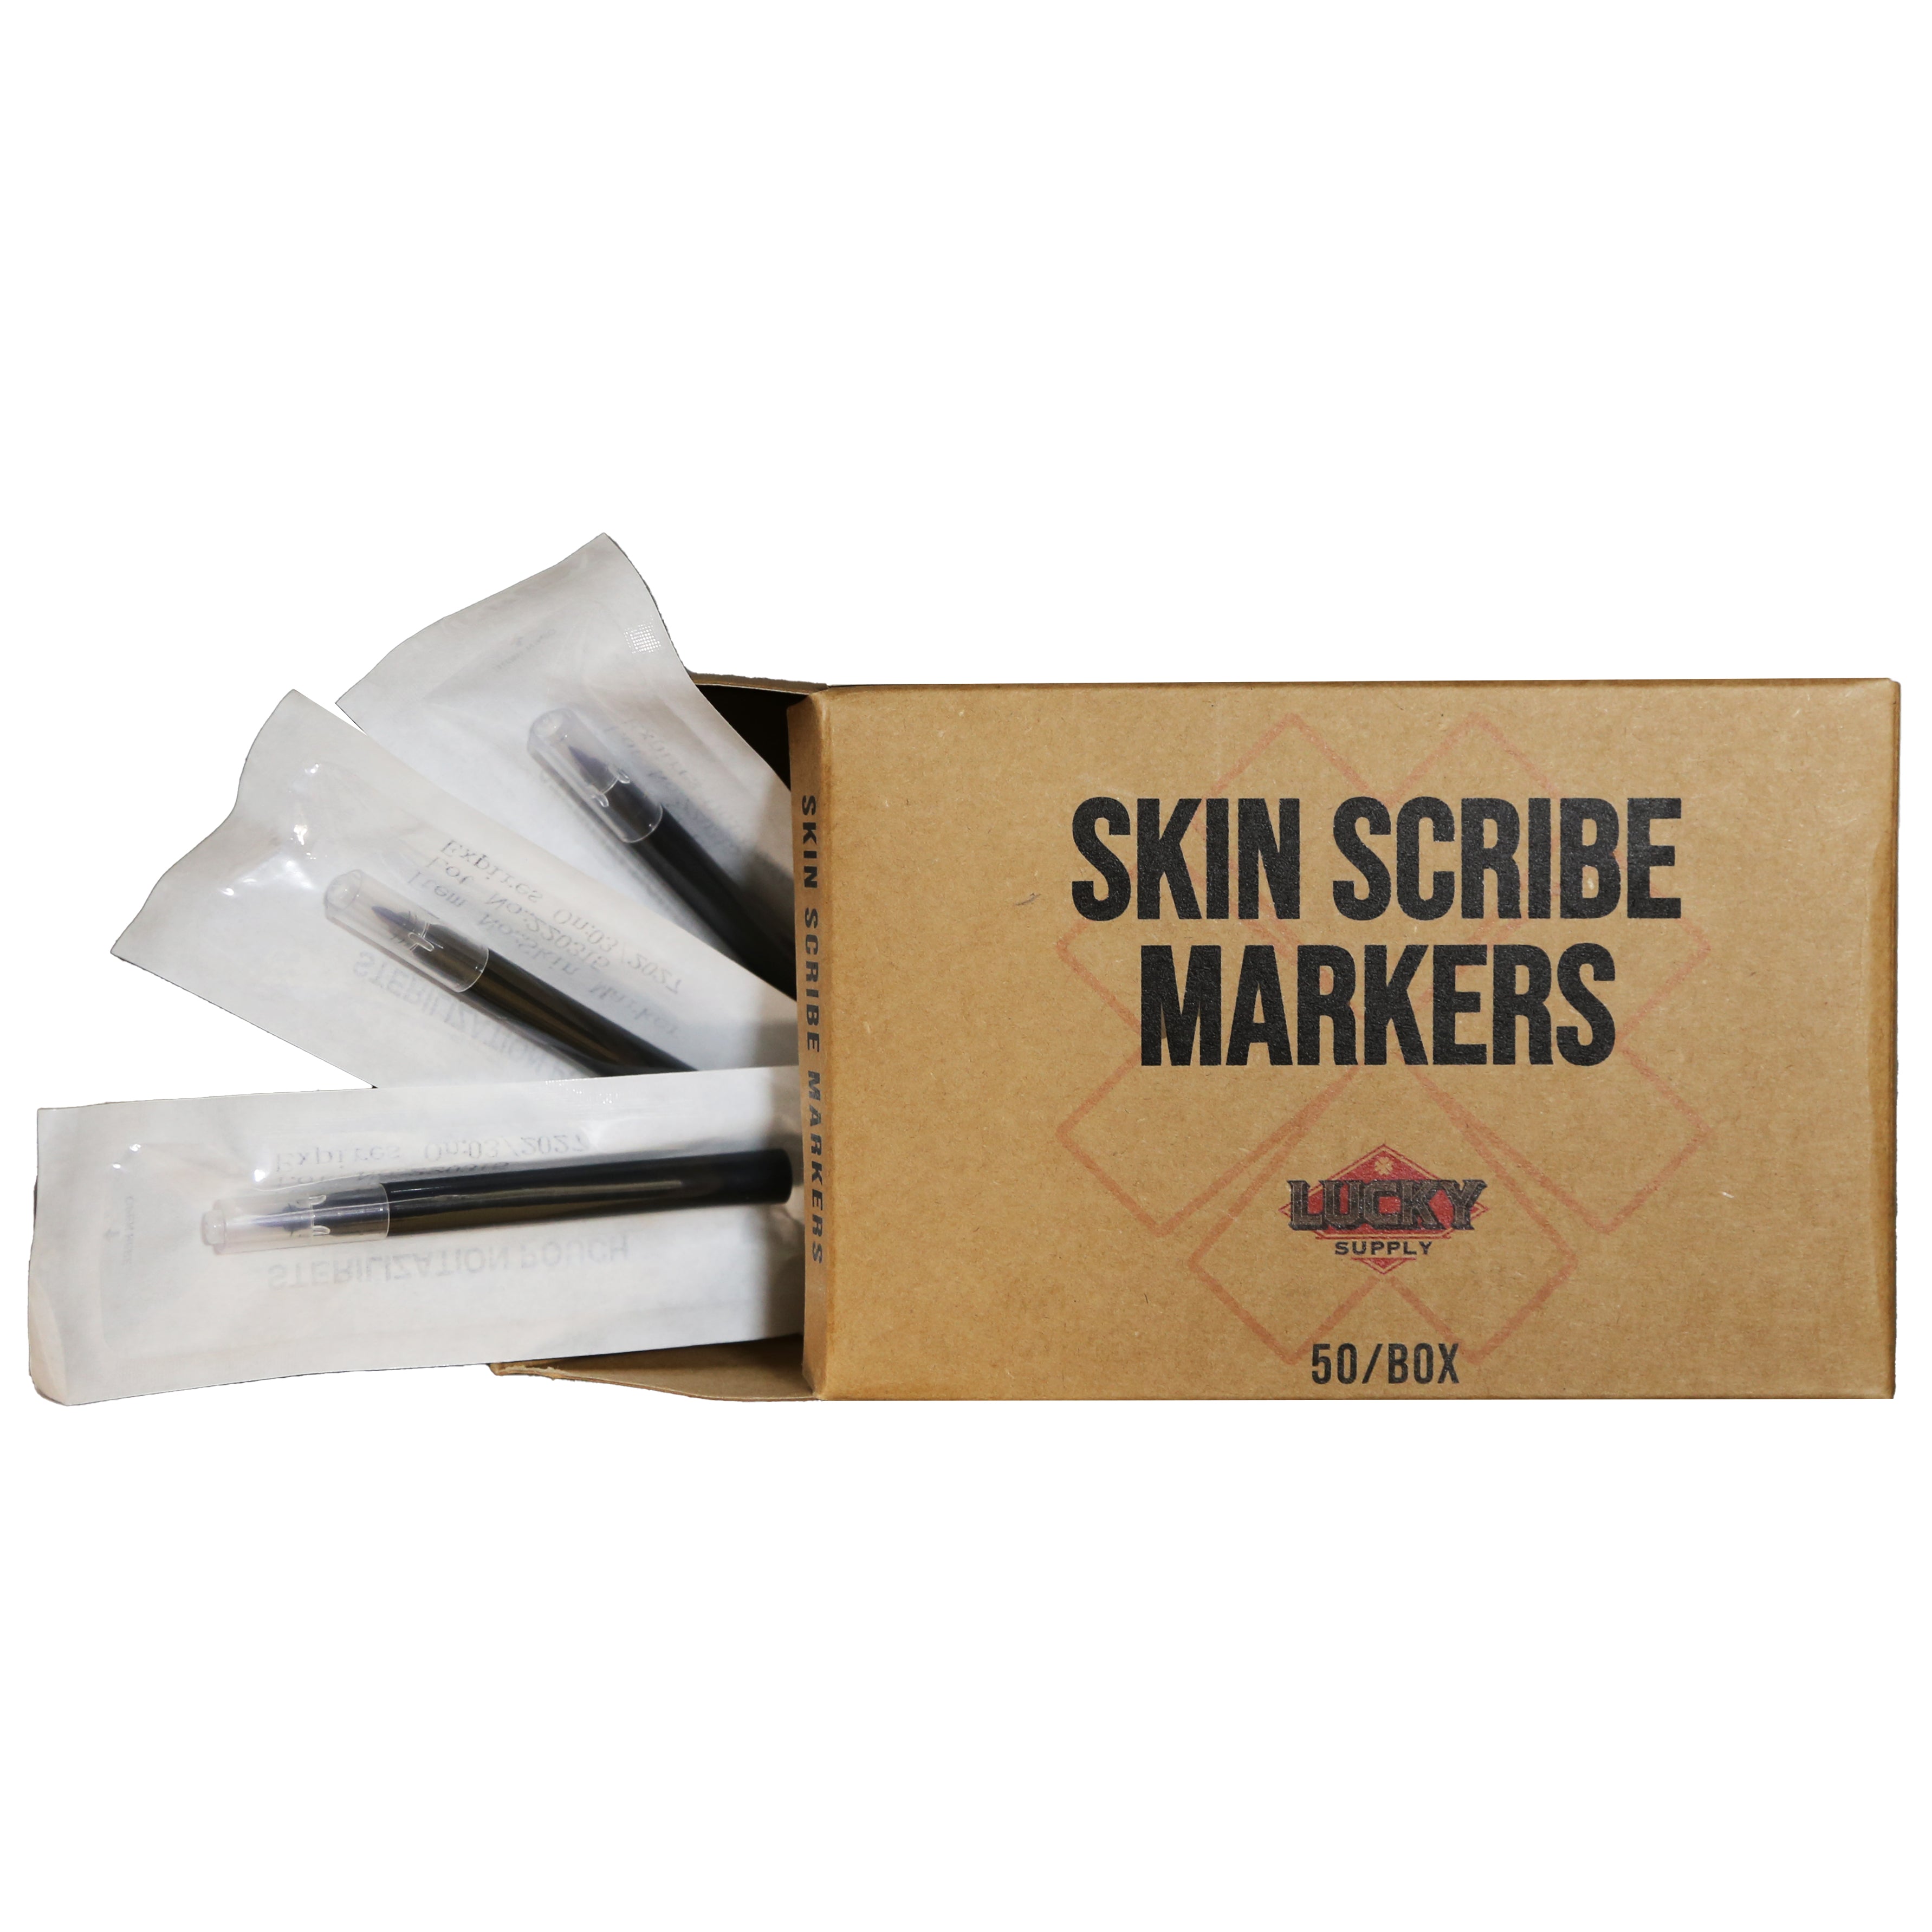 Skin Scribe Markers